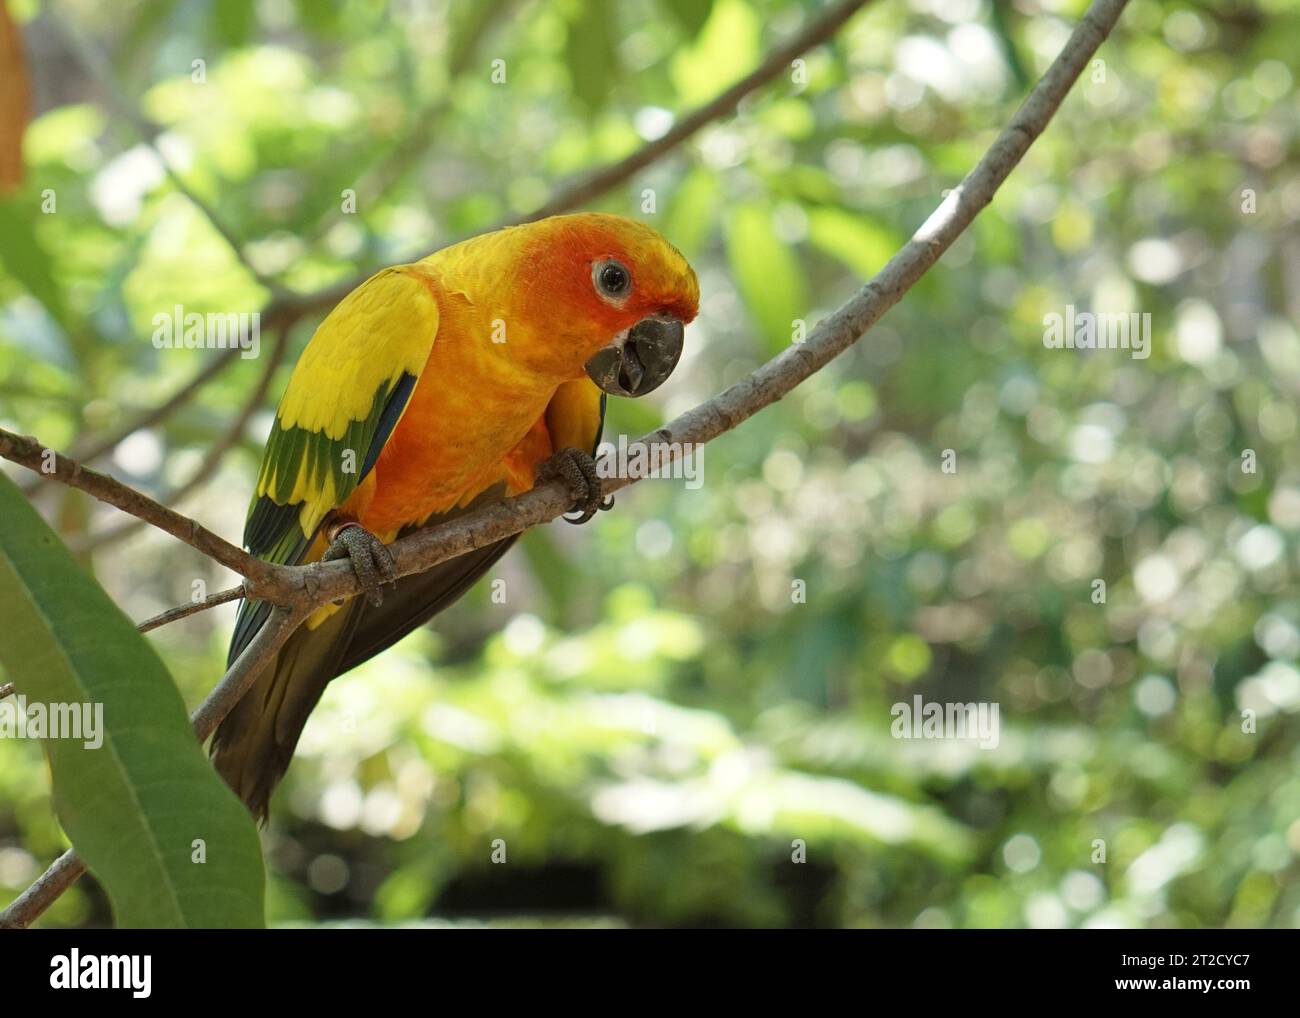 a yellow sun conure bird perched on a tree branch, in large botanical garden inside aviary bird park. Stock Photo